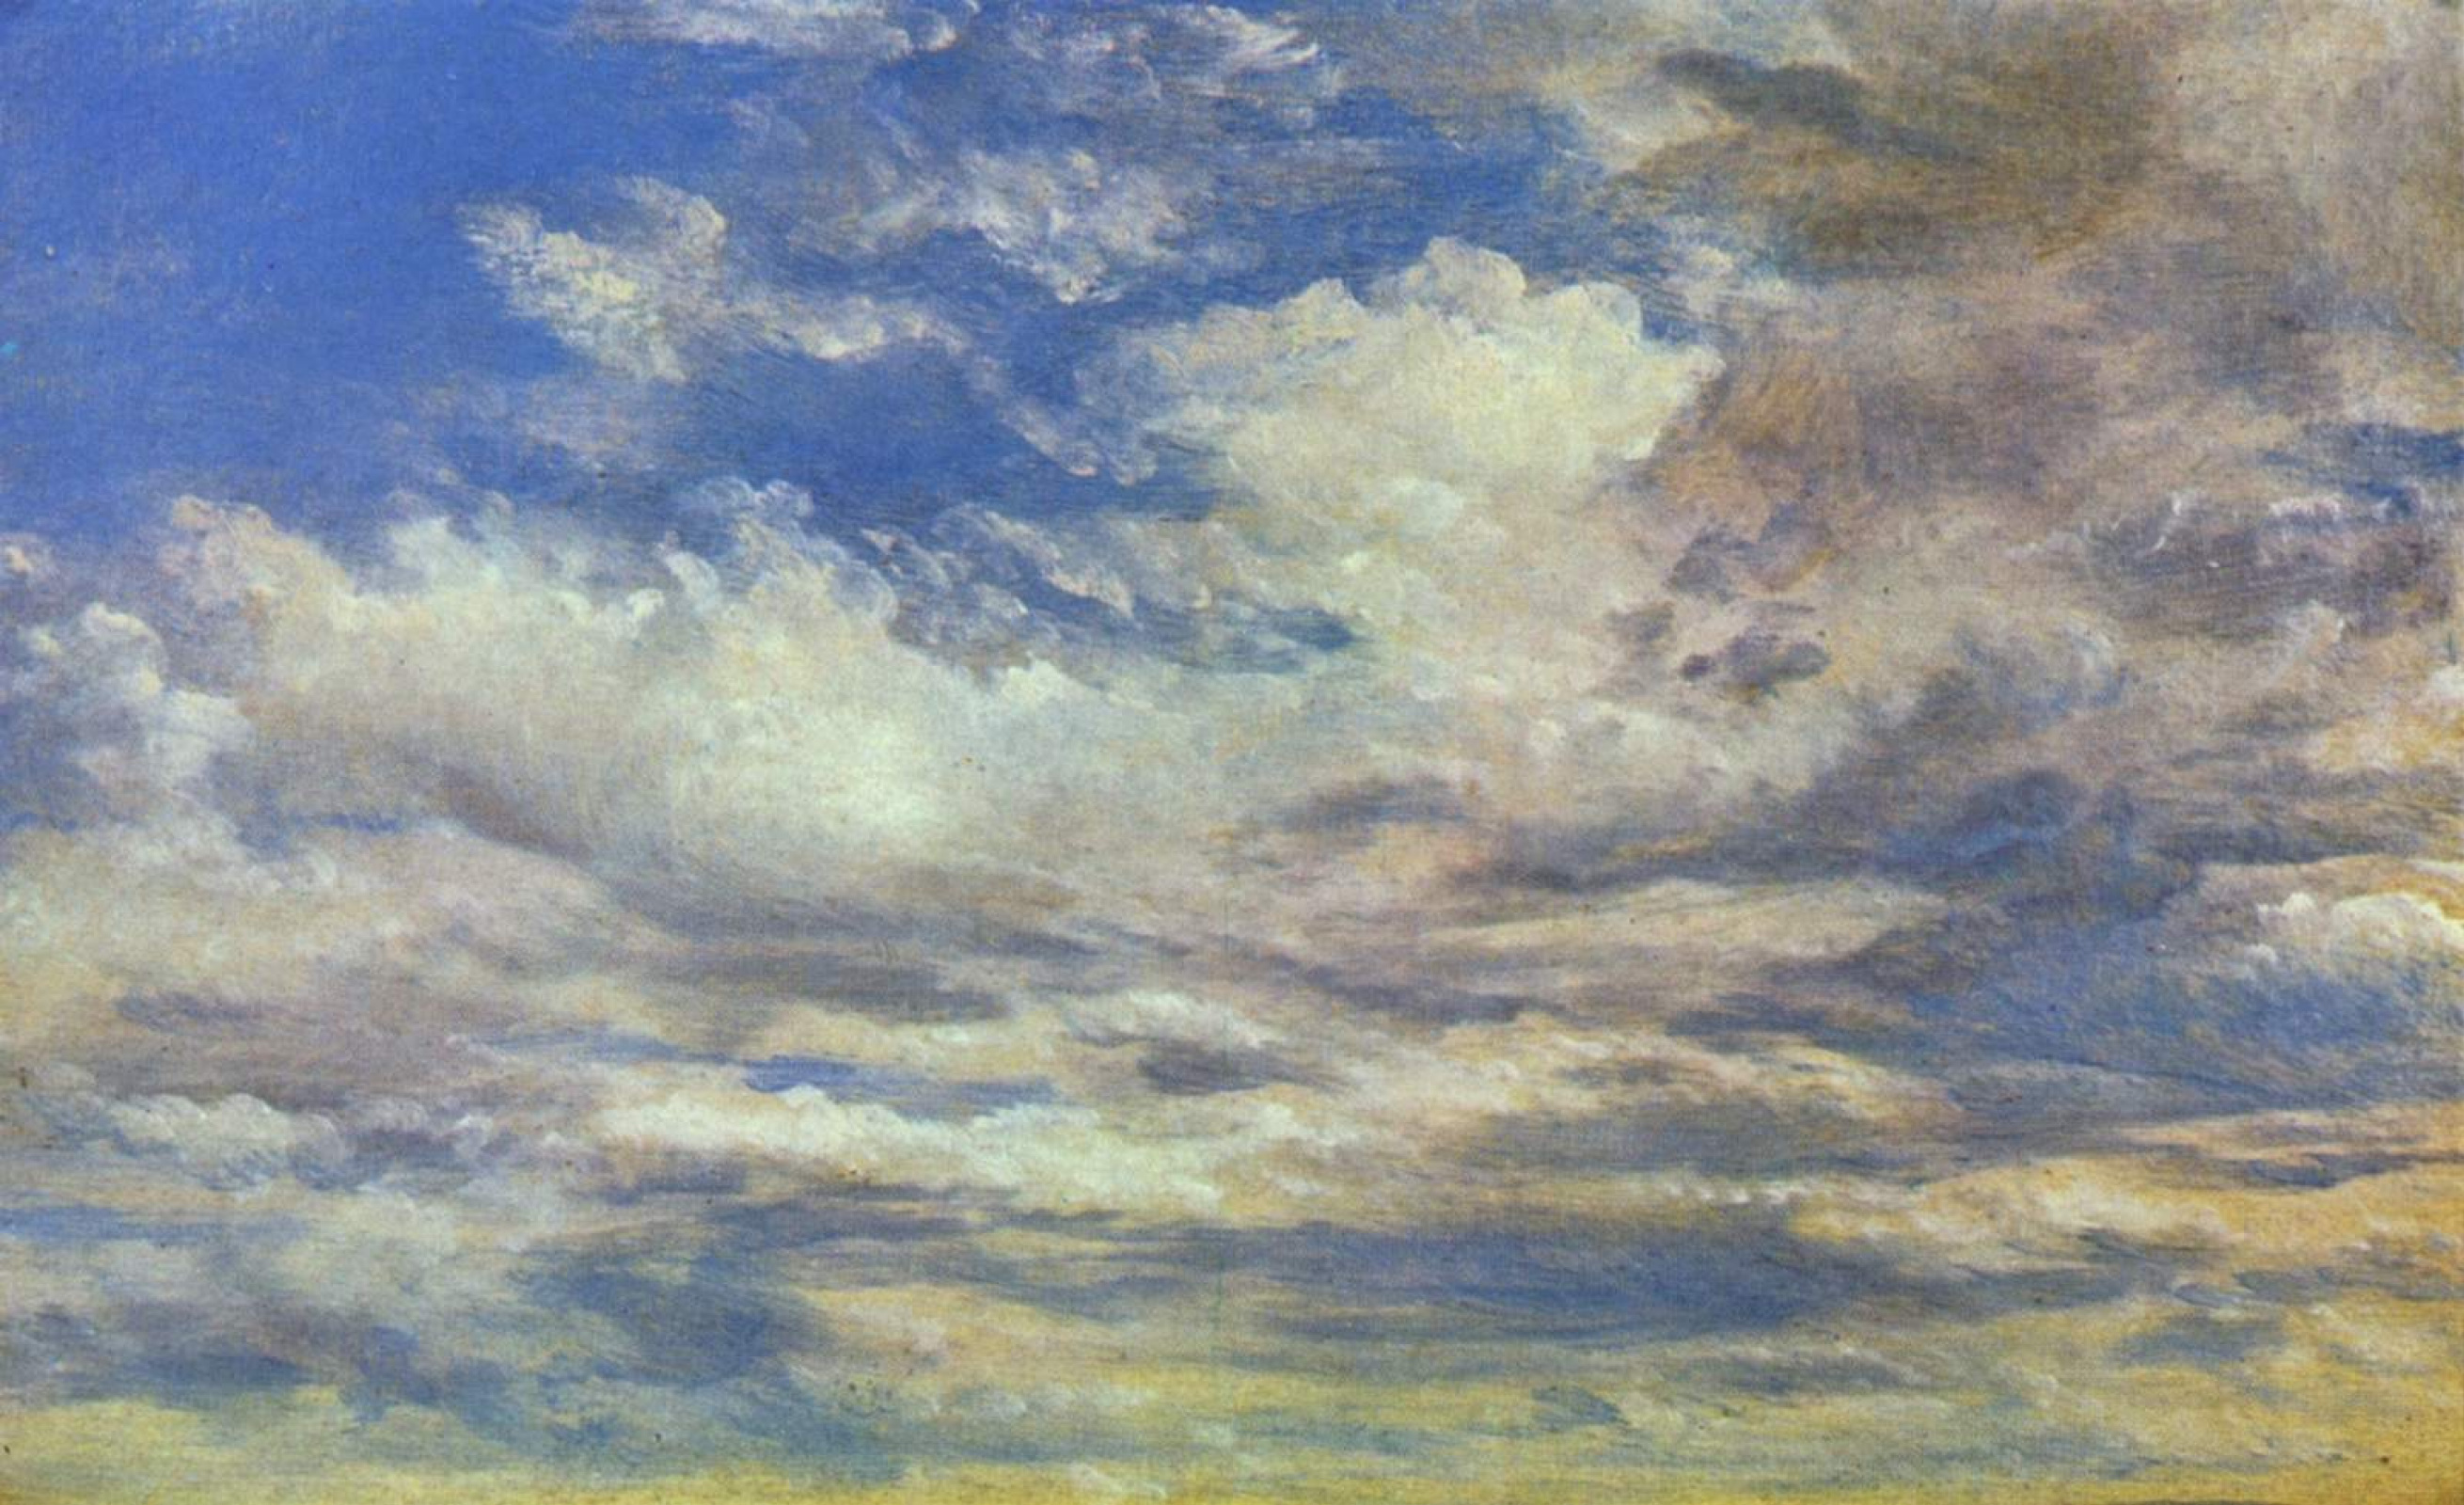 The Art of Seeing Nature' Ten Drawings by John Constable